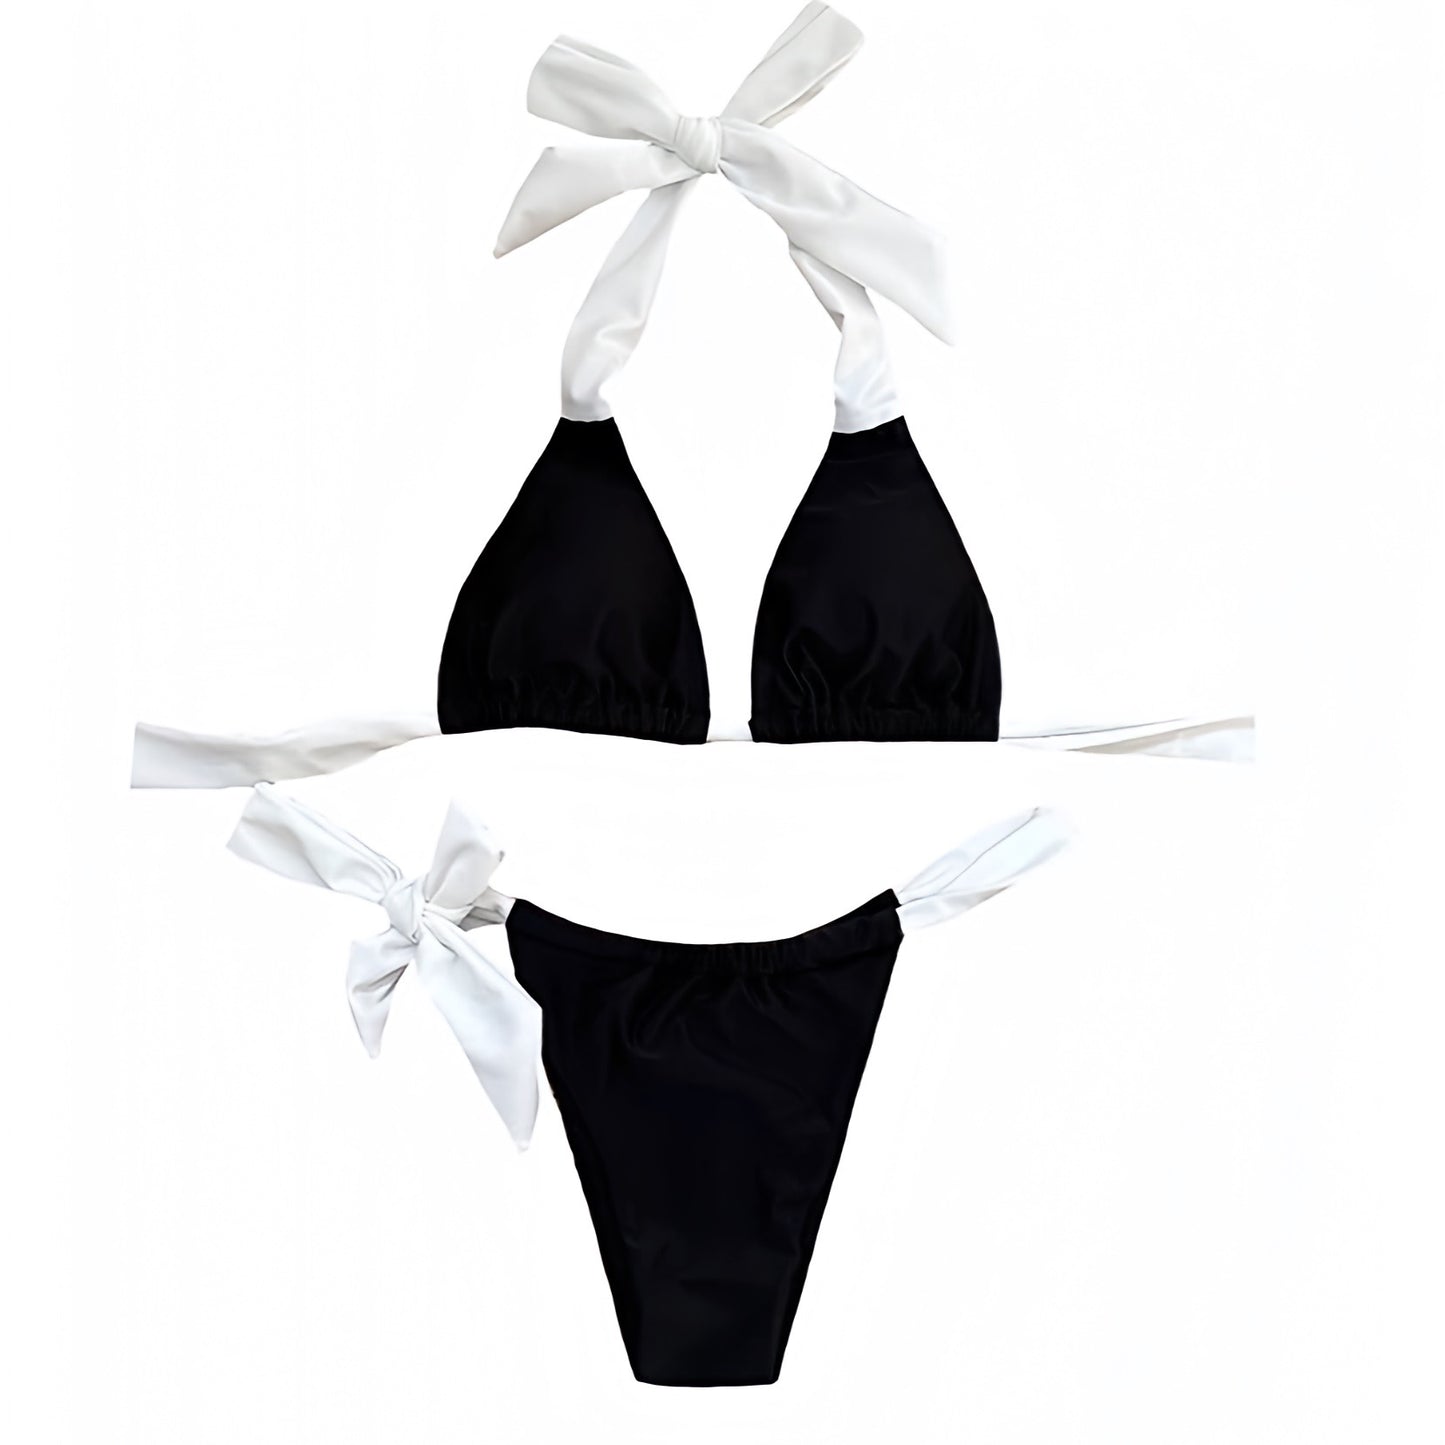 black-and-white-contrast-push-up-triangle-bikini-set-two-piece-swimsuit-swimwear-bathing-suit-top-bottoms-thong-bow-string-tie-spaghetti-strap-short-sleeve-spring-2024-summer-chic-trendy-women-ladies-elegant-classy-sexy-brazilian-european-french-old-money-quiet-luxury-beach-wear-vacation-same-oneone-revolve